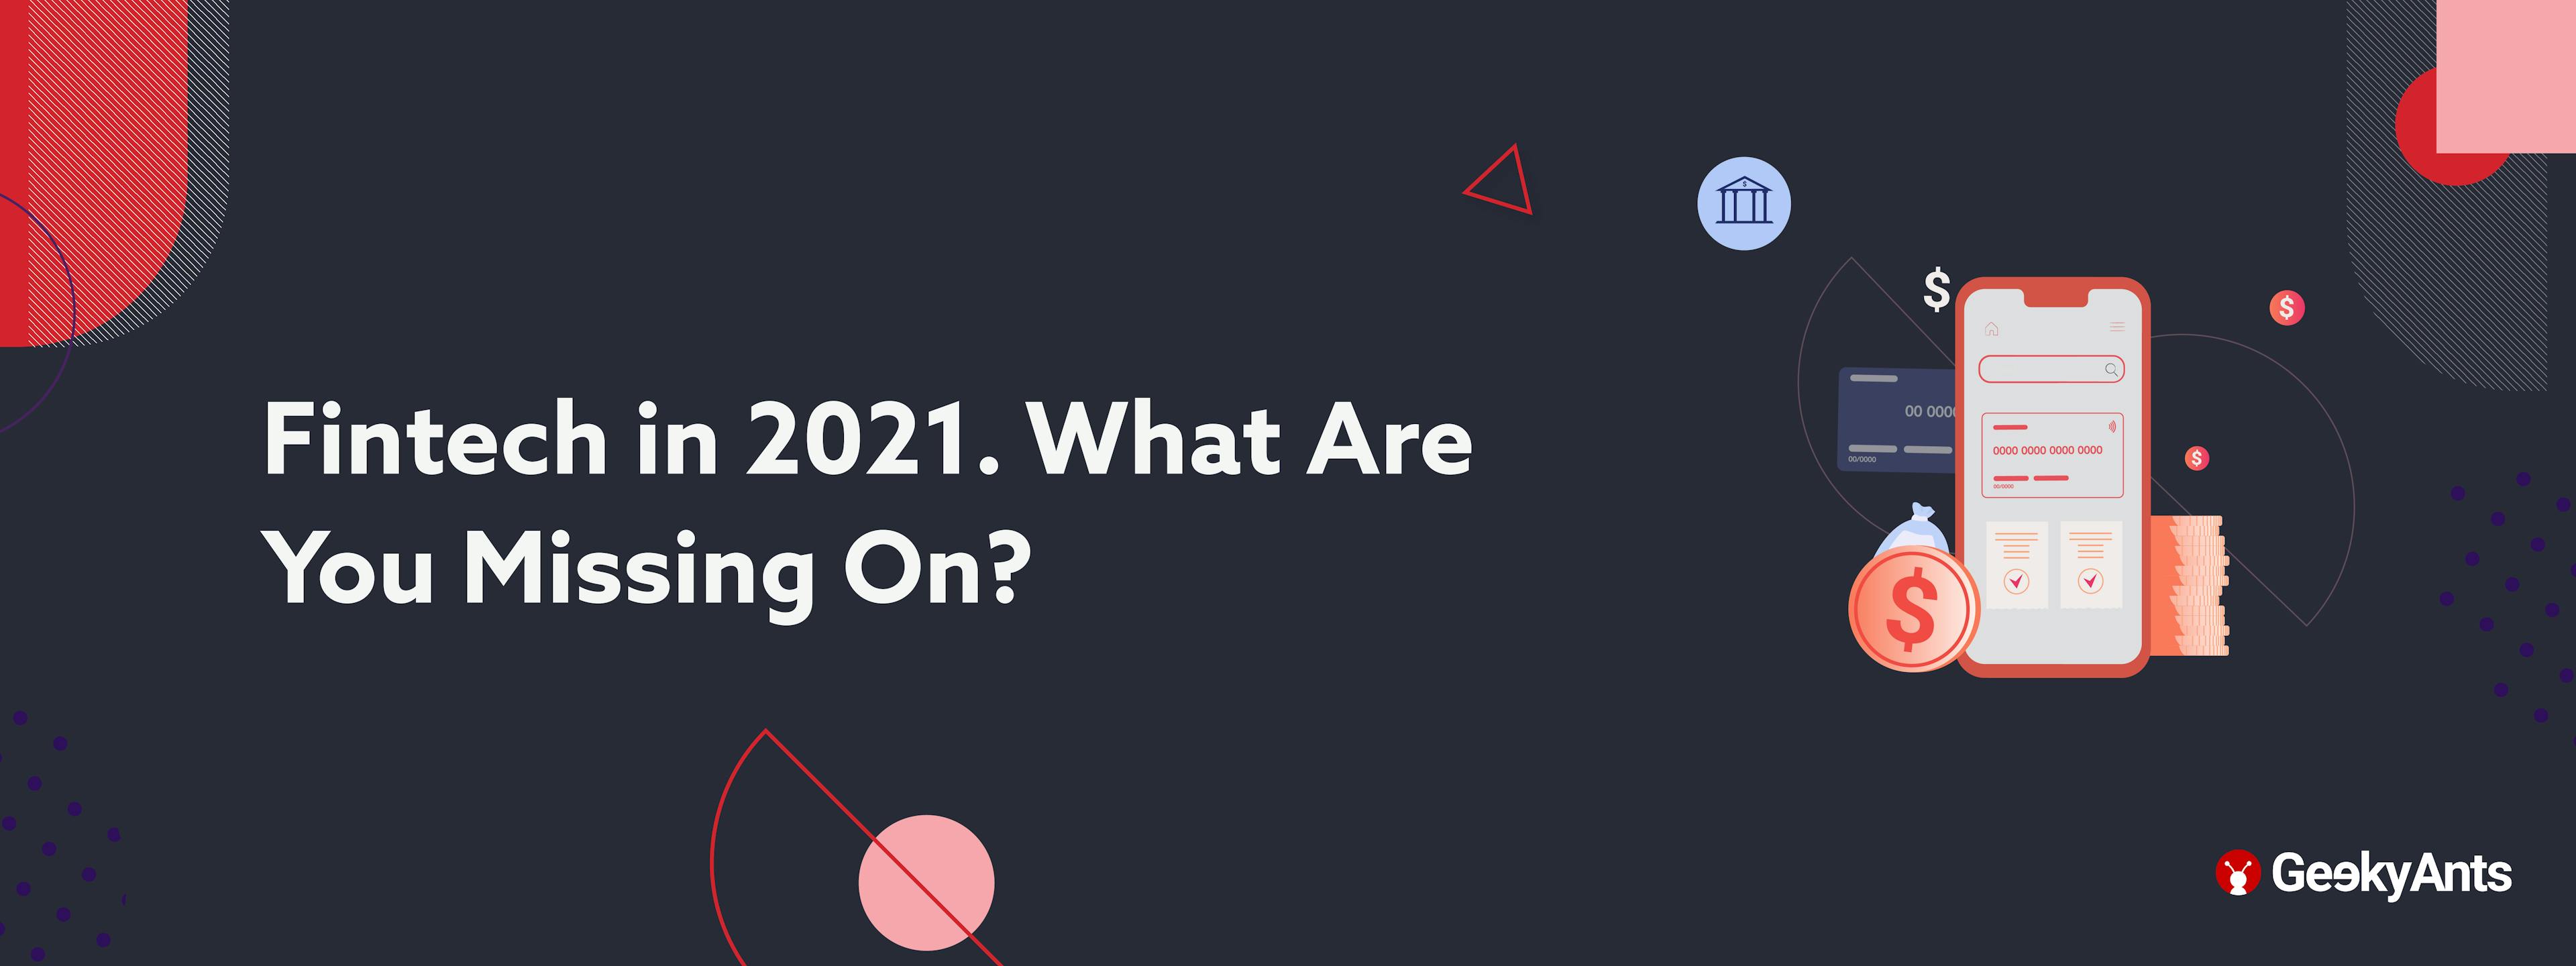 Fintech in 2021: What Are You Missing On?